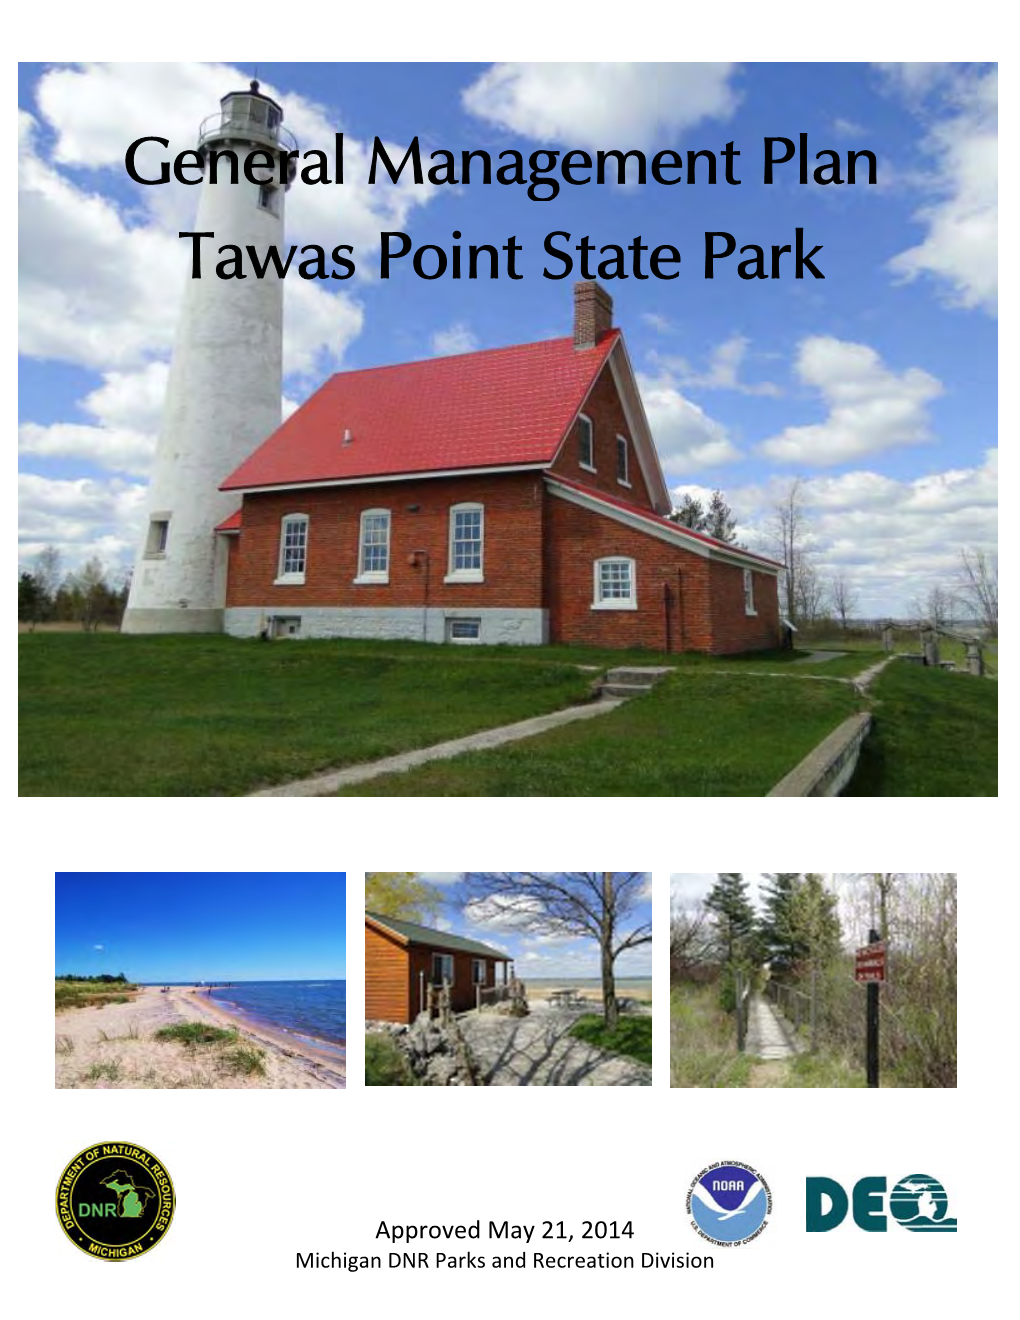 General Management Plan Tawas Point State Park